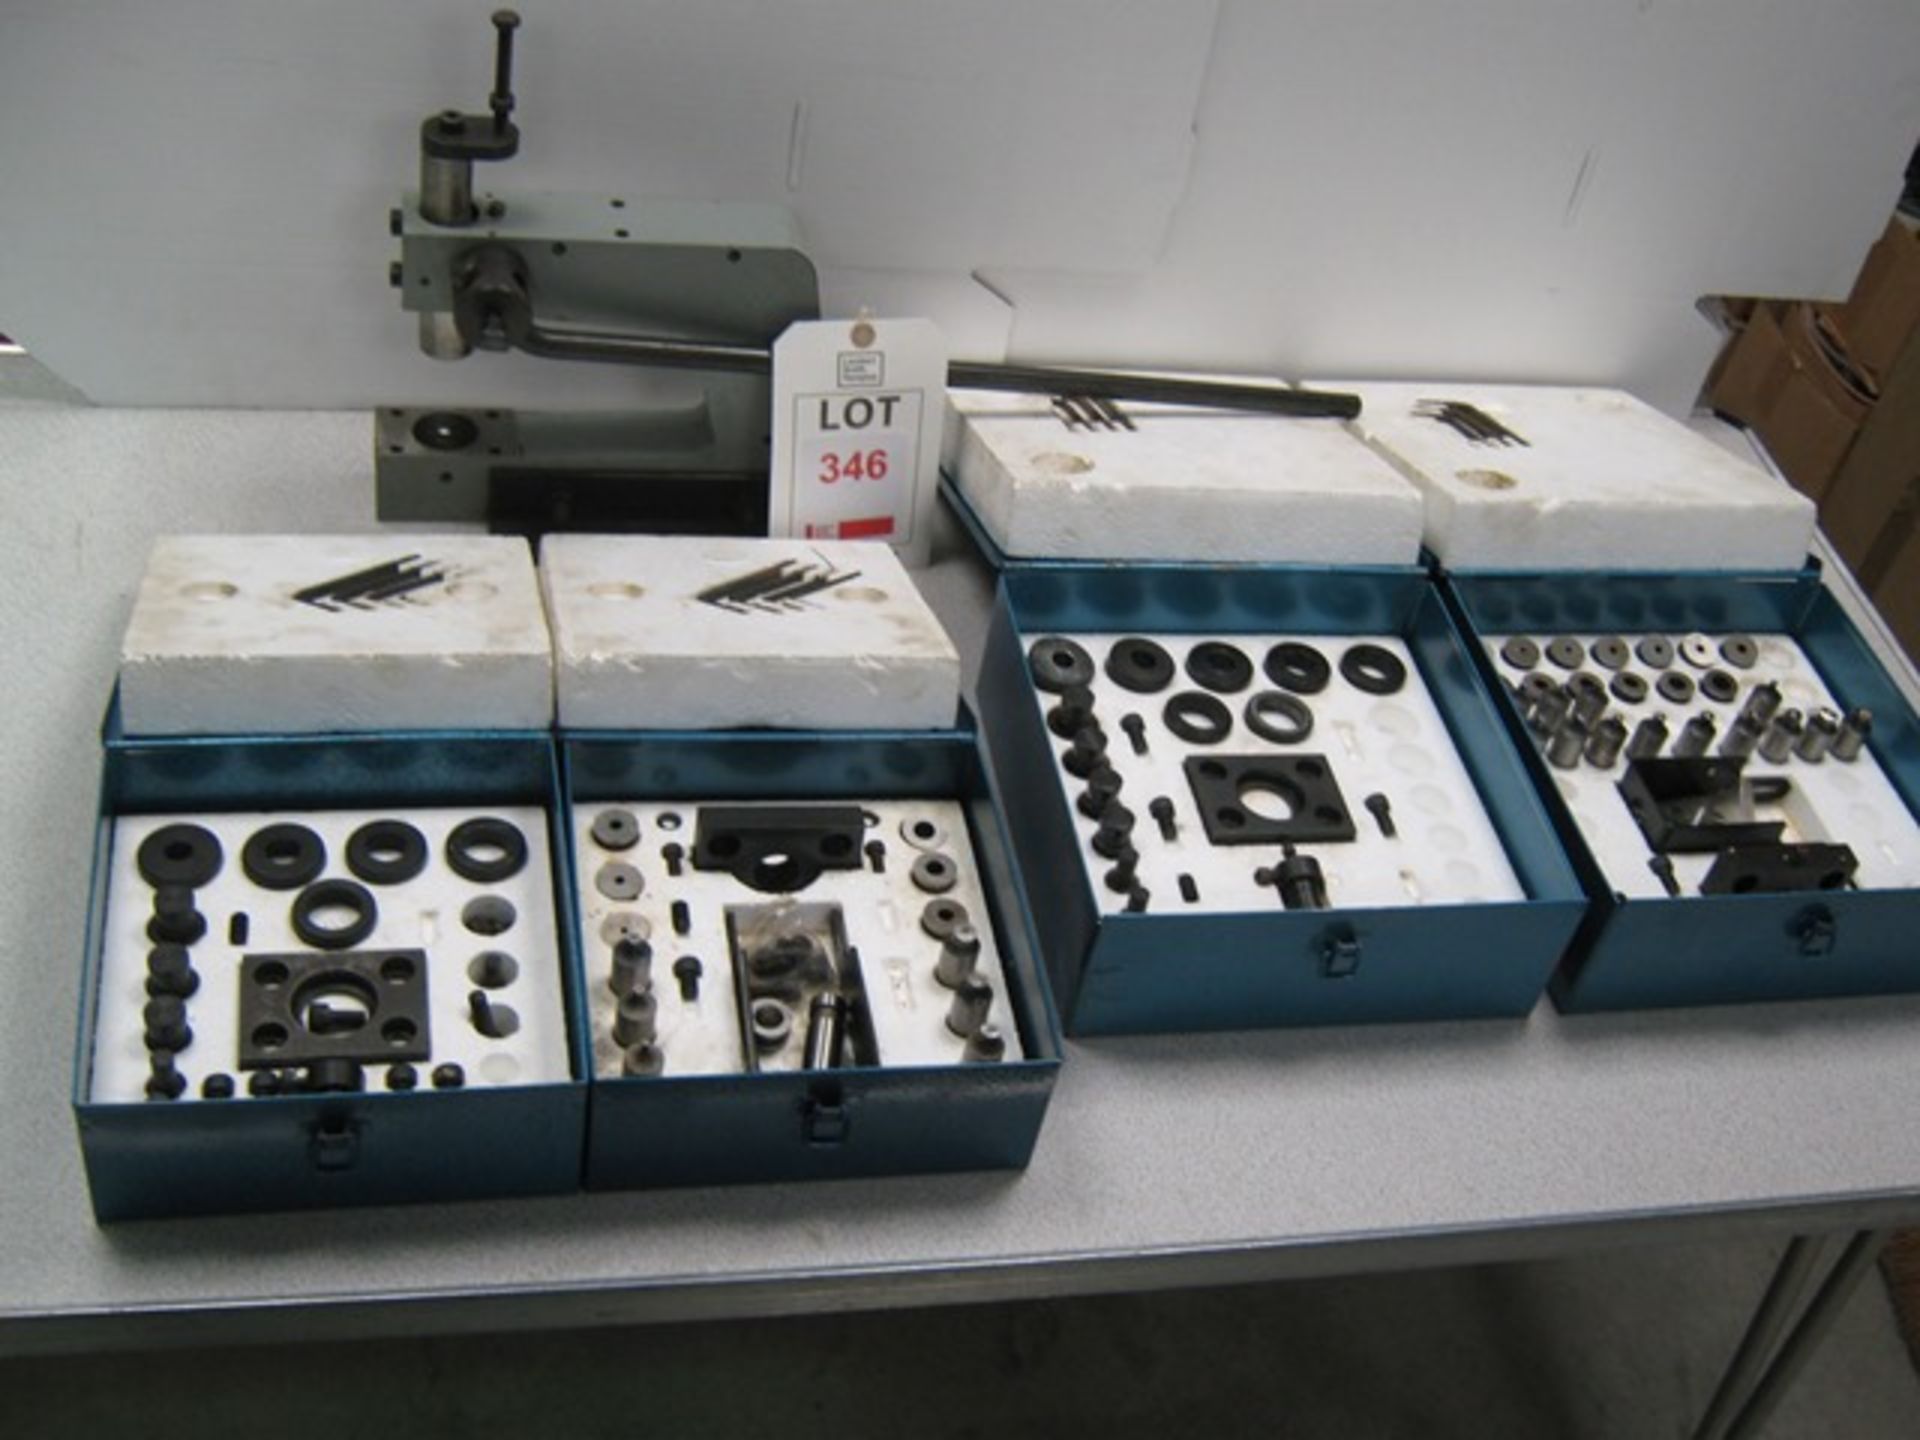 Hand Punch and Die Sets (RS Cat numbers 541-446 541-444 541-438 541-450 ) 3mmto 27.5mm 1/8" to 1"